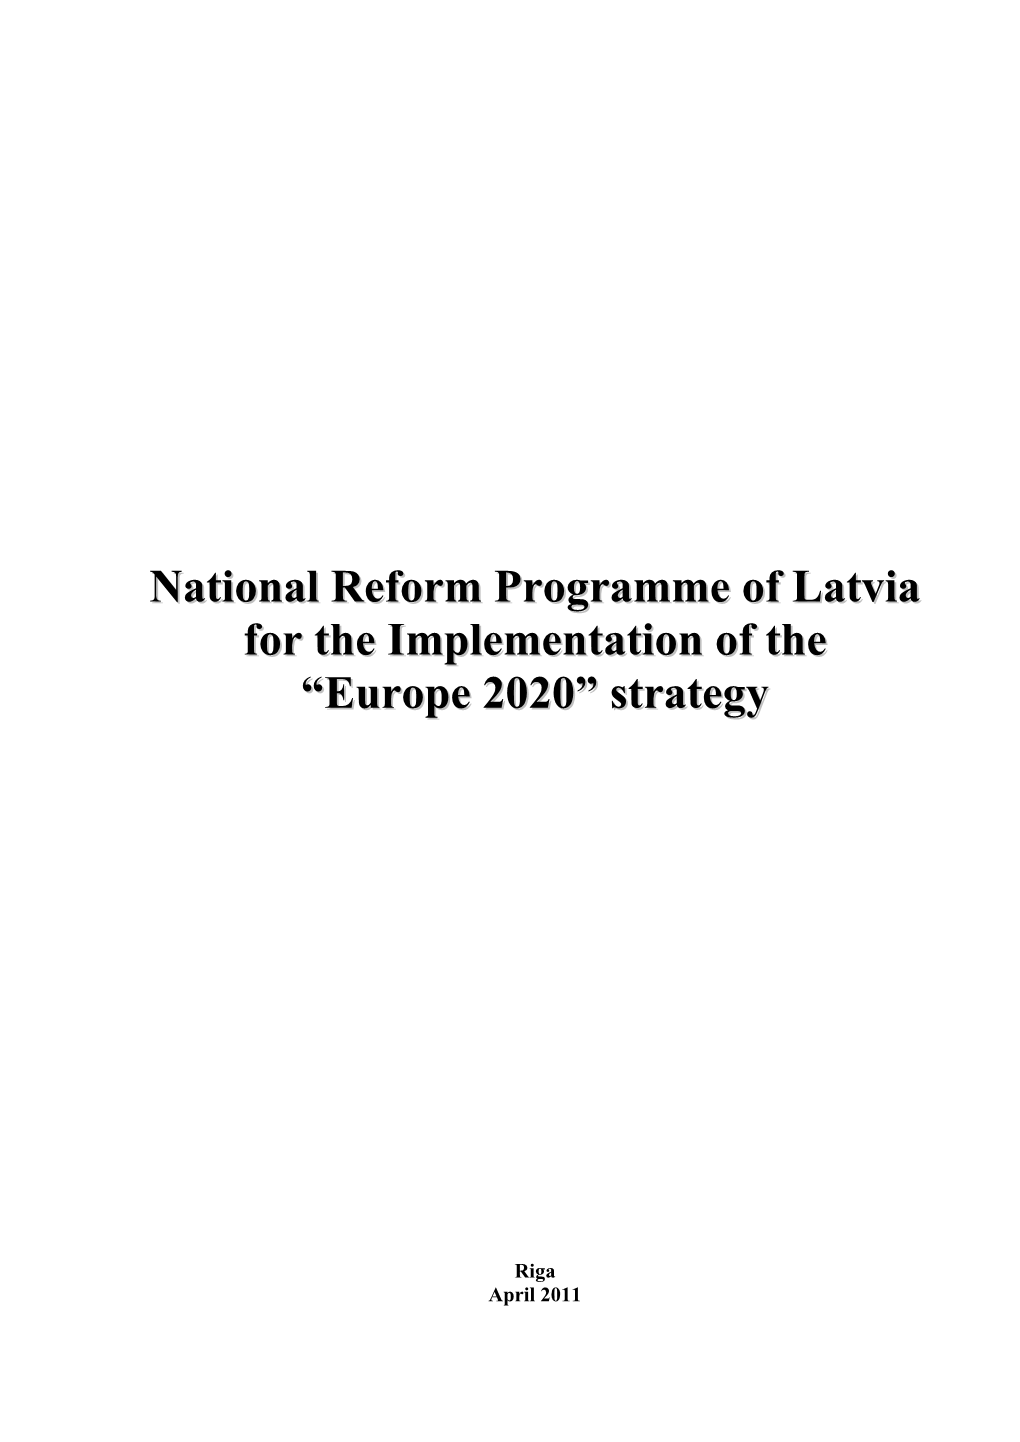 National Reform Programme of Latvia for Implementation of The“European Union 2020”